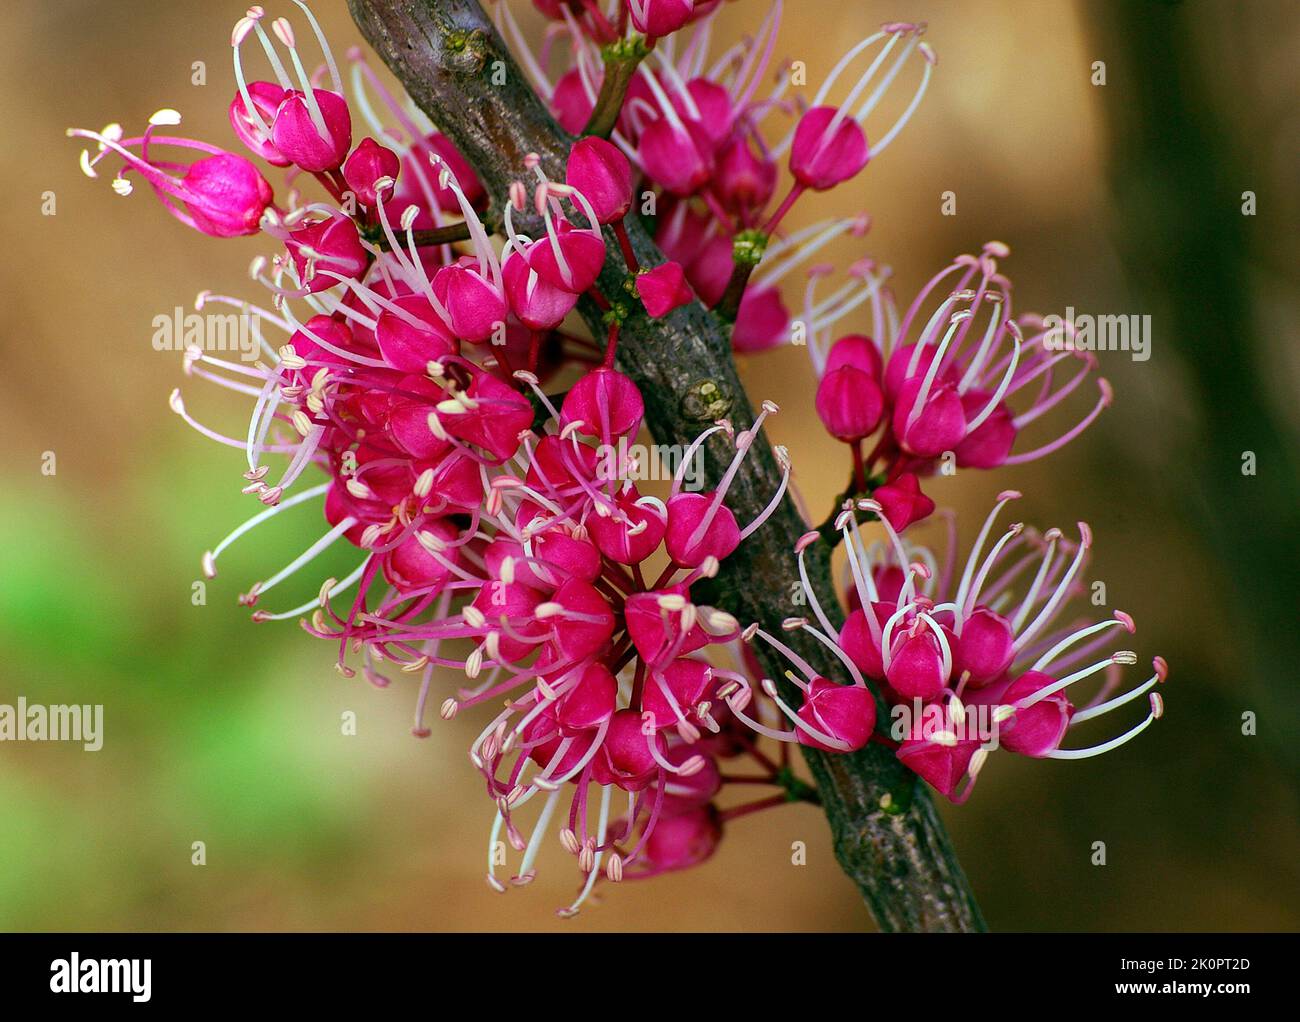 Bright pink and white flowers of Pink Evodia, Melicope elleryana, growing directly from woody branches. Native Australian tree in Queensland garden. Stock Photo